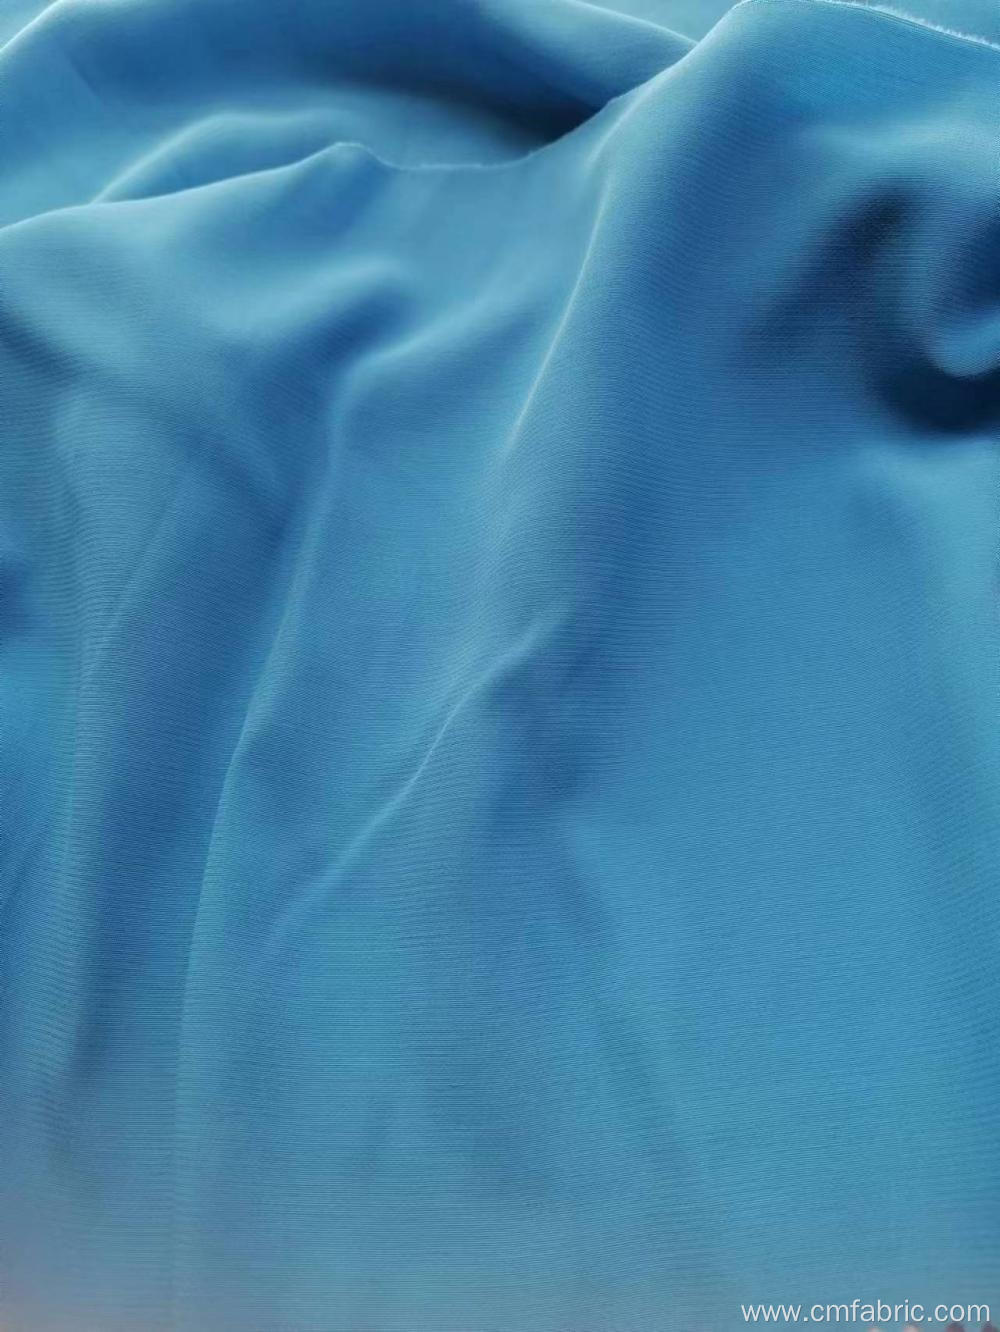 Woven Rayon polyester artificial cupro plain dyed fabric